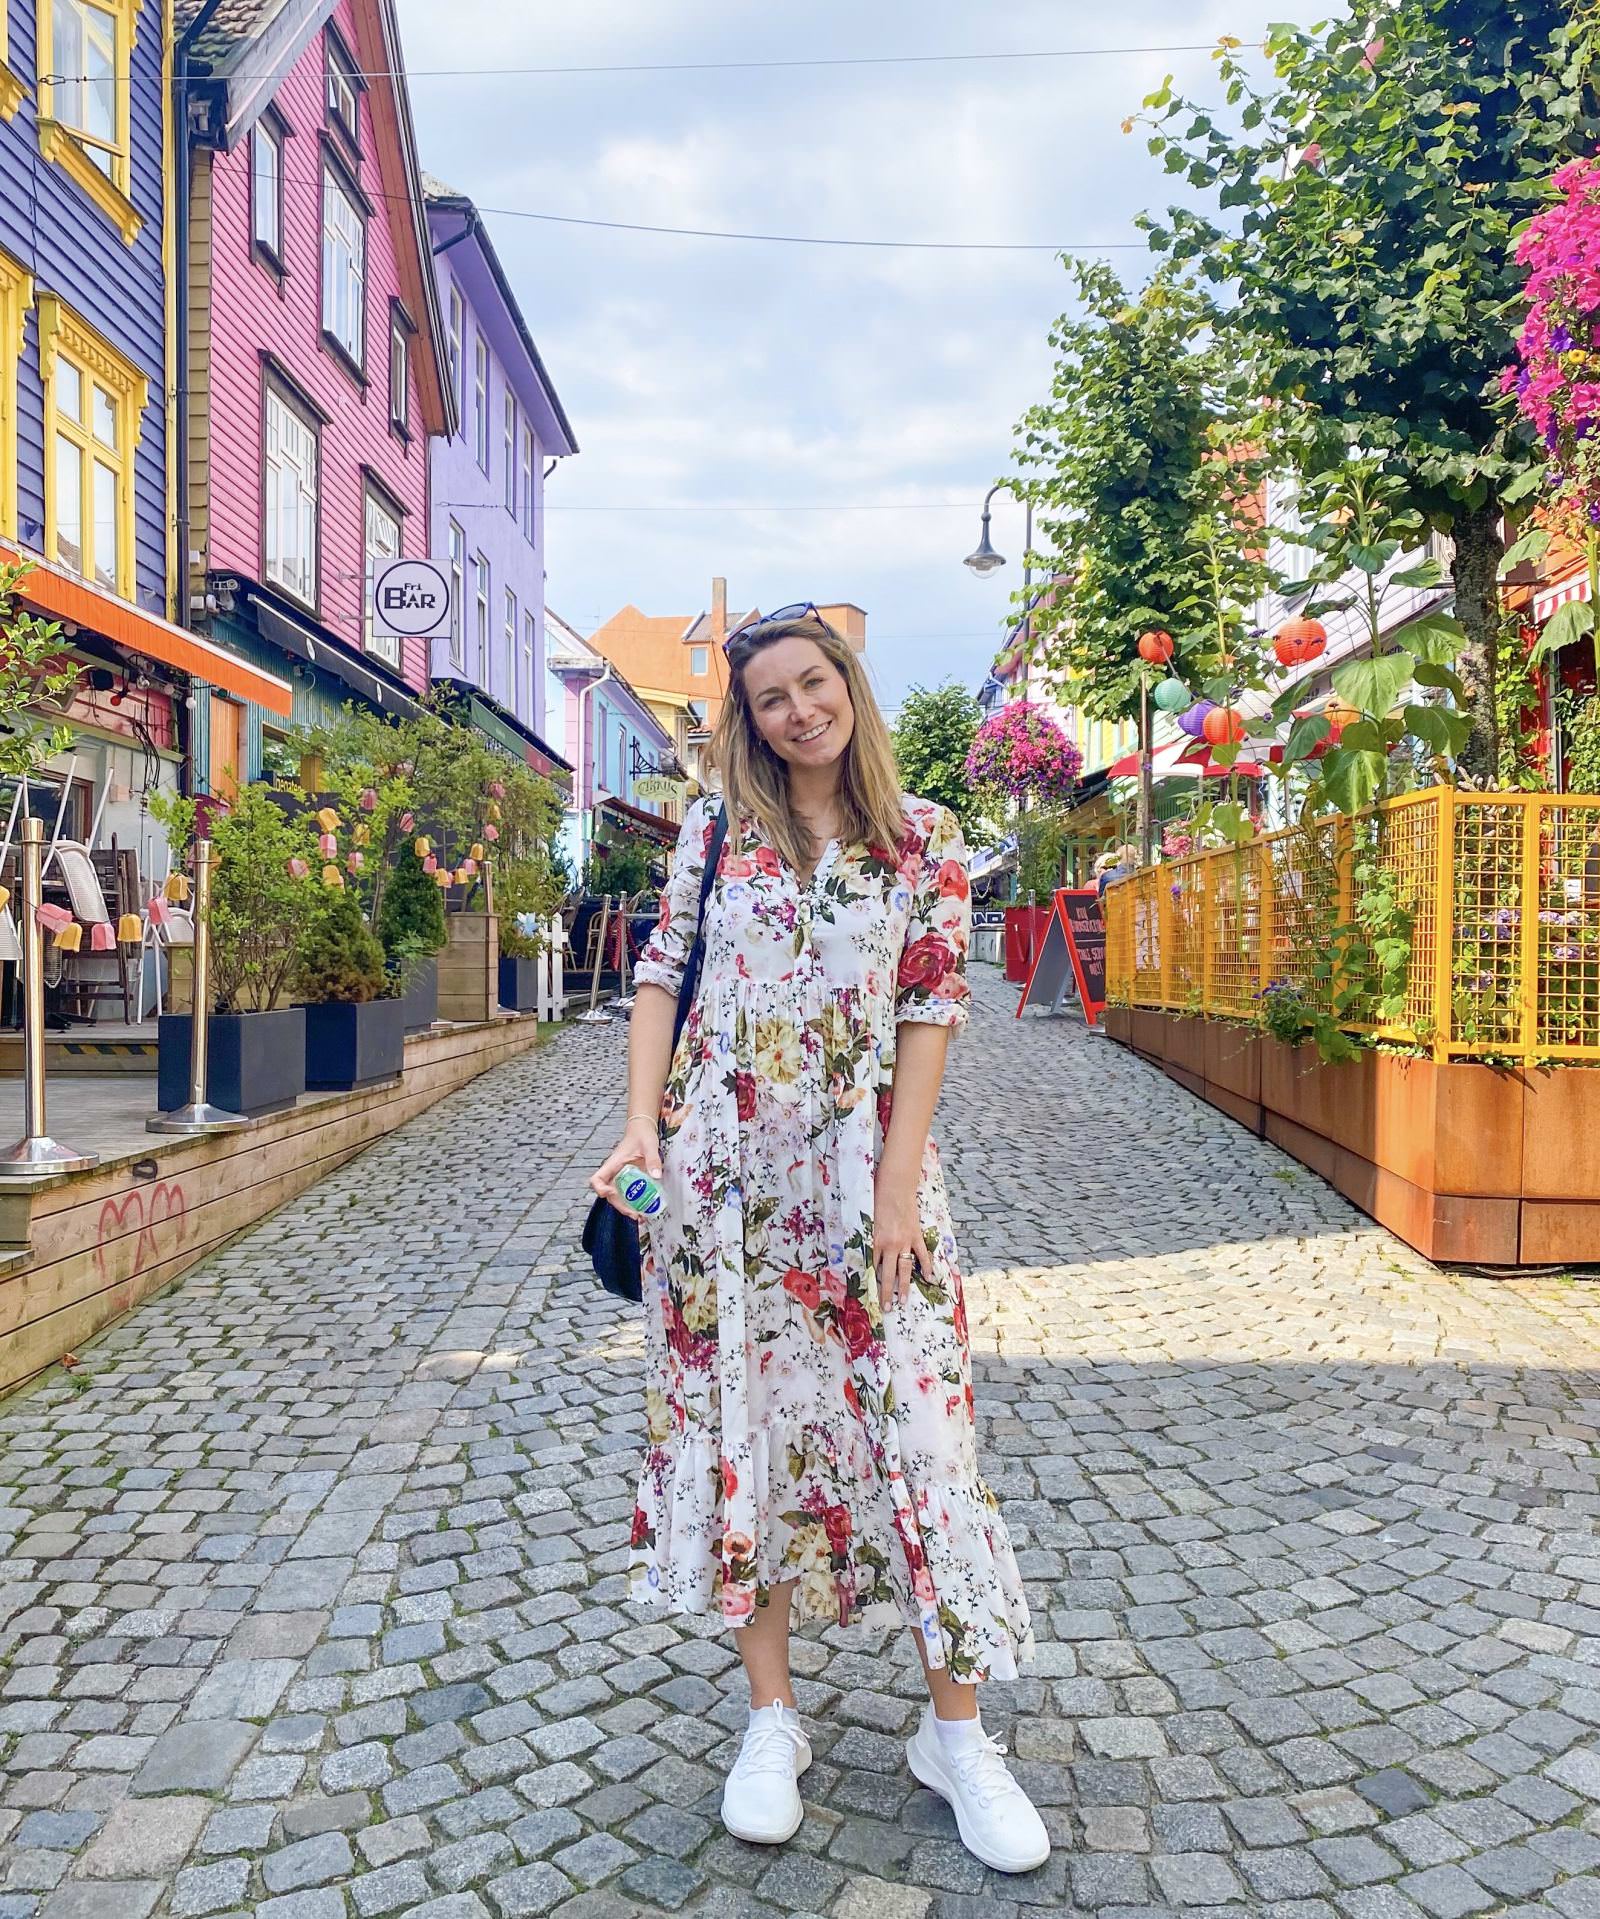 How to Spend A Long Weekend in Stavanger